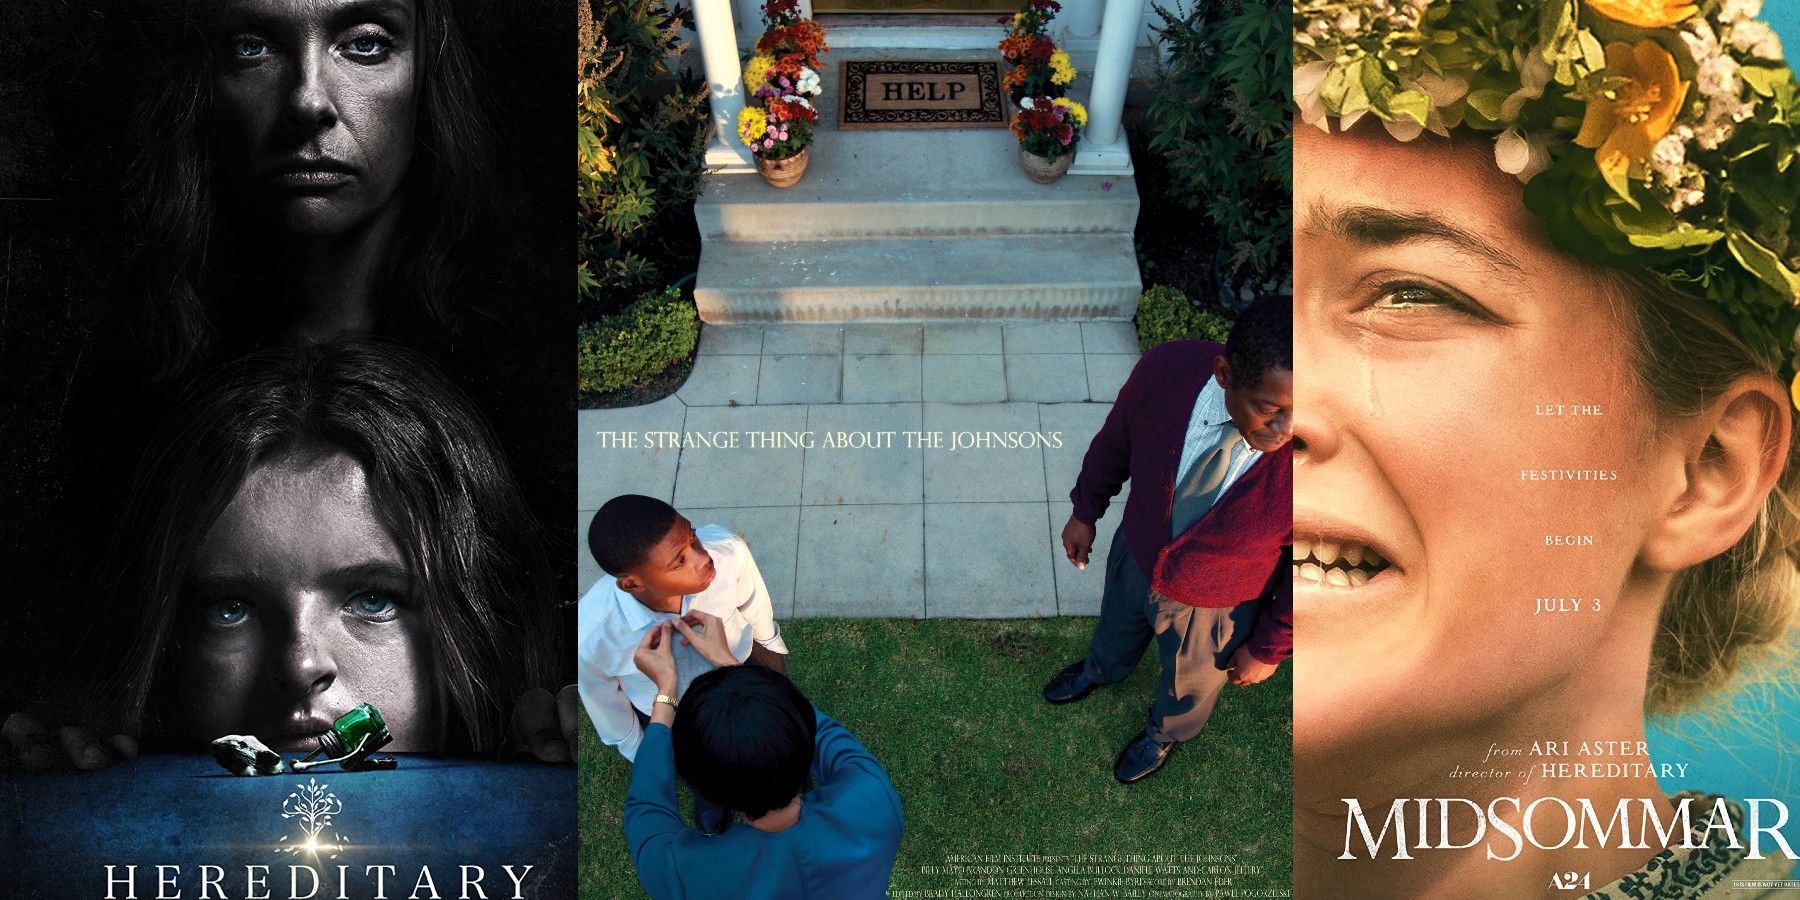 Ari Aster's Hereditary, The Strange Thing About the Johnsons, and Midsommar posters